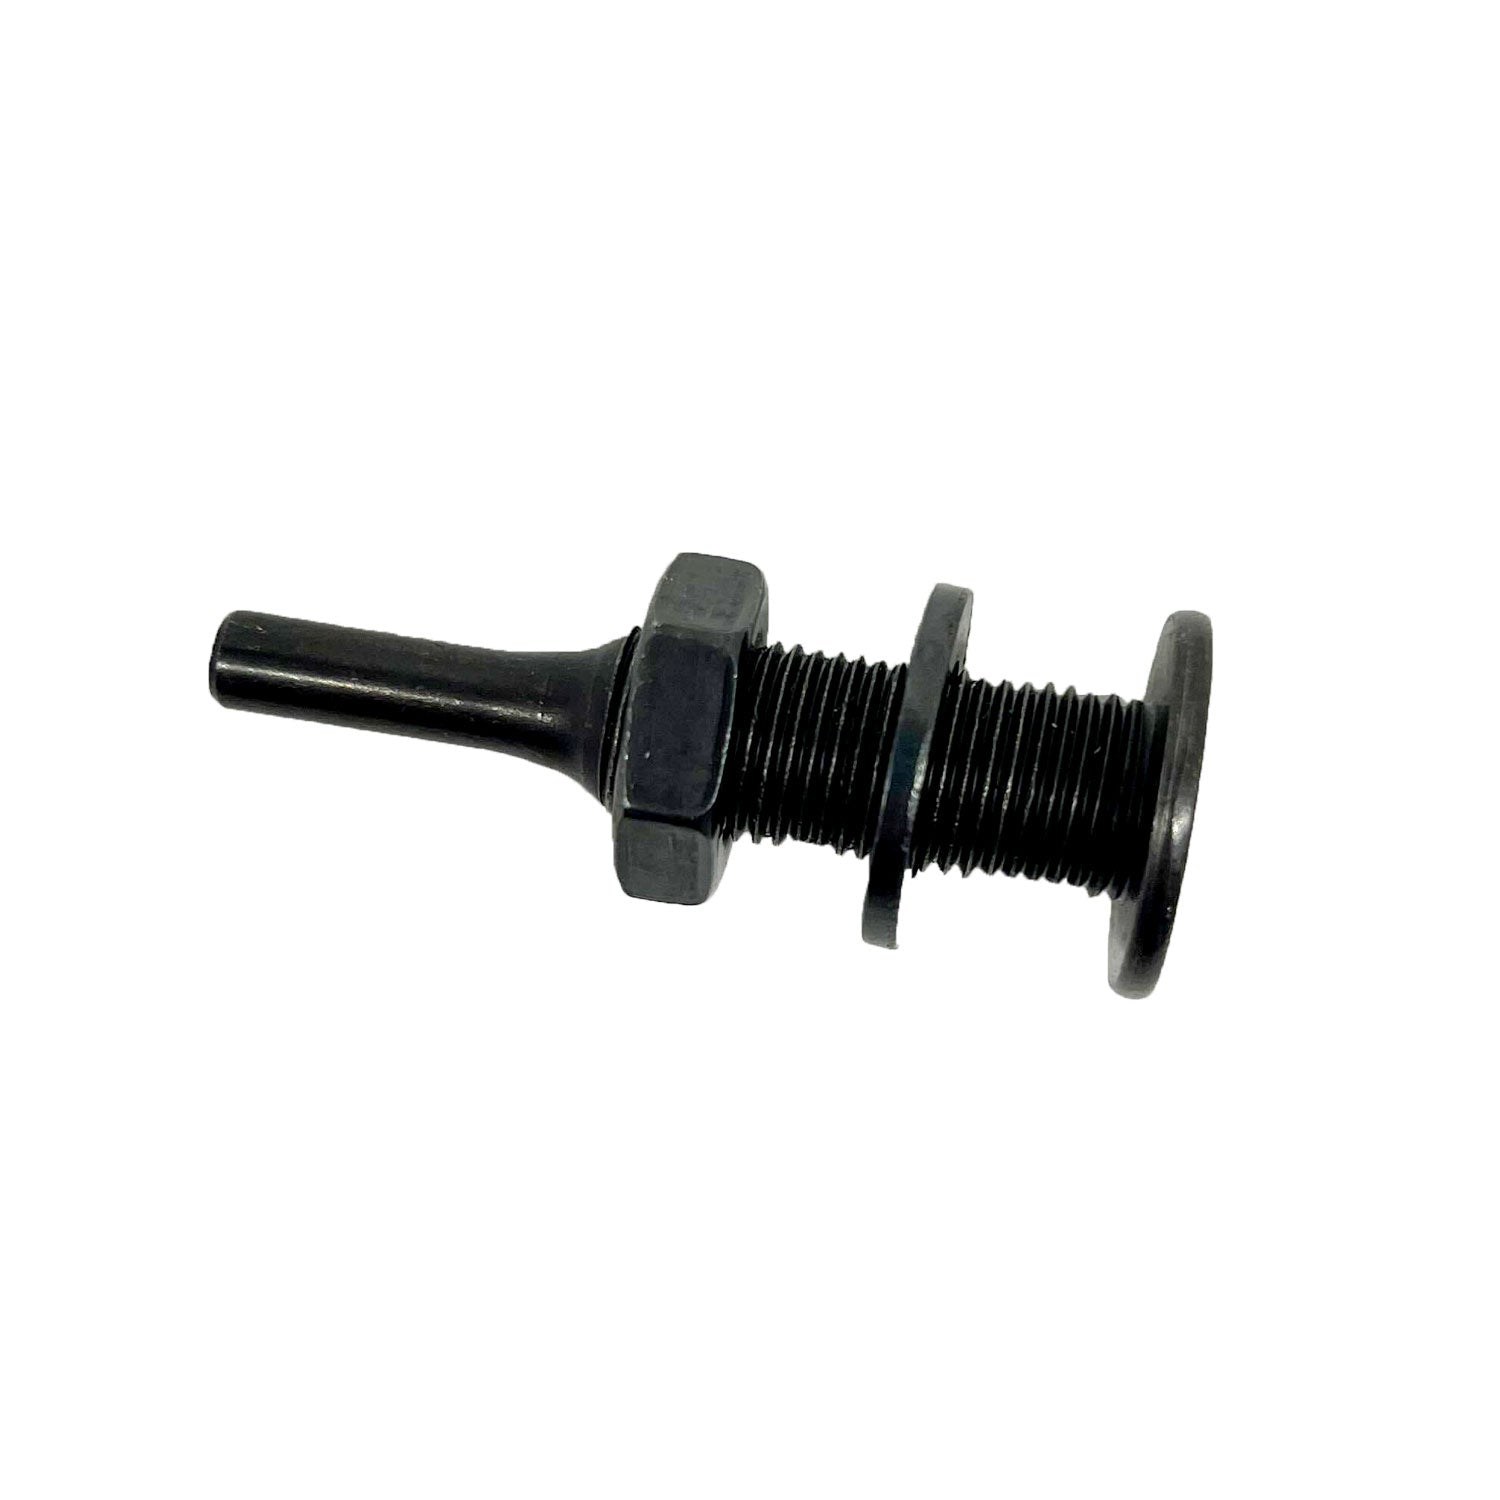 Black 1/2 inch Mandrel for Mini Buffing Wheels, perfect for secure attachment and optimum performance in polishing and buffing tasks.